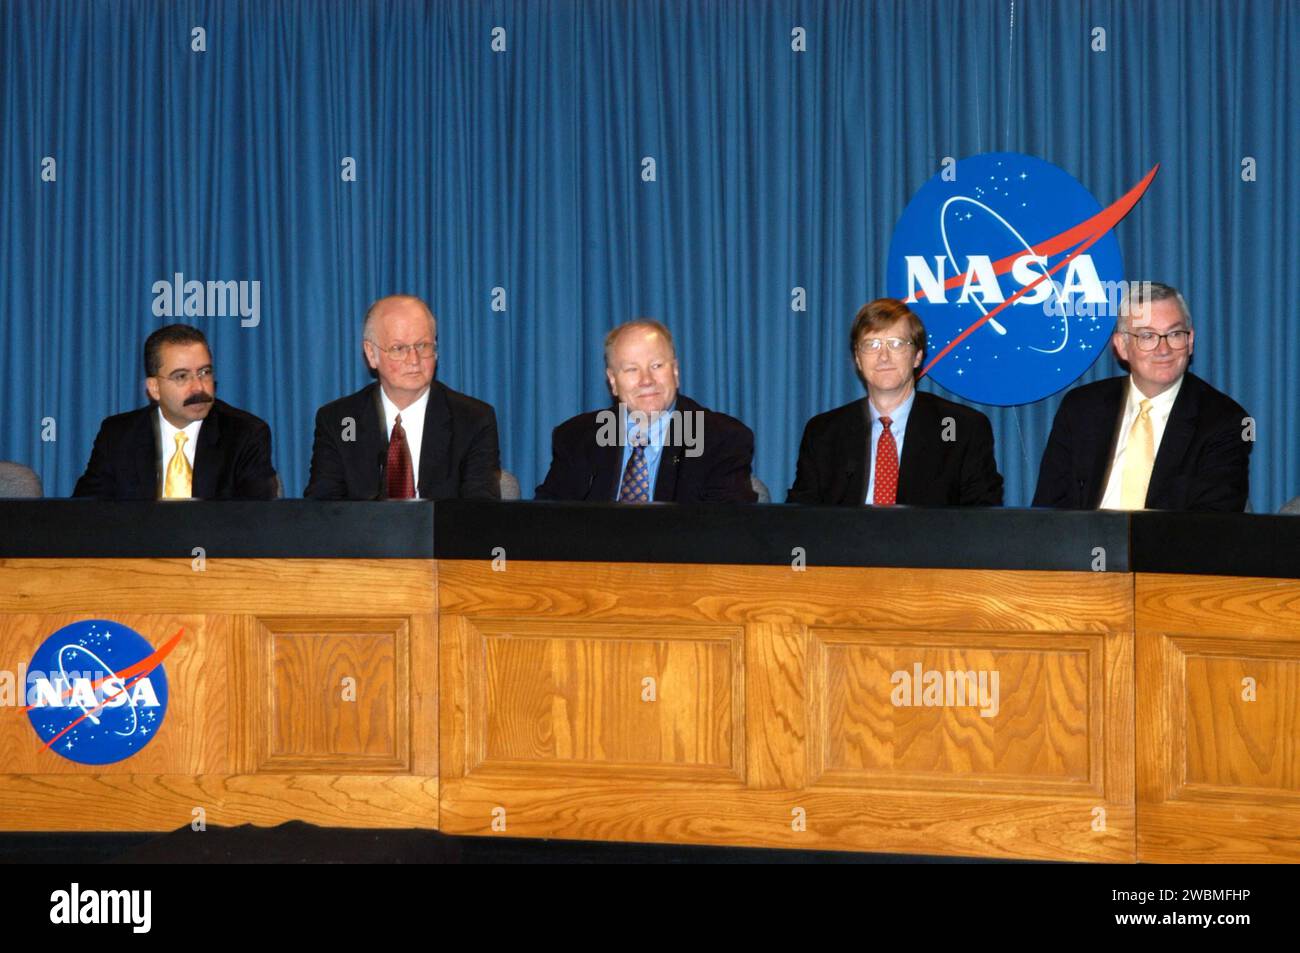 KENNEDY SPACE CENTER, FLA. - Representatives of NASA’s New Horizons Mission to Pluto are ready to answer questions during a press briefing on the Draft environmental Impact Statement at NASA’s Kennedy Space Center. From left are Orlando Figueroa, deputy association administrator for Programs, Science Mission Directorate; Earl Wahlquist, associate director for Space and Defense Power Systems, Department of Energy, in Germantown, Md.; Kurt Lindstrom, New Horizons Program executive, with NASA; Hal Weaver, New Horizons Project scientist, Johns Hopkins University Applied Physics Laboratory in Laure Stock Photo